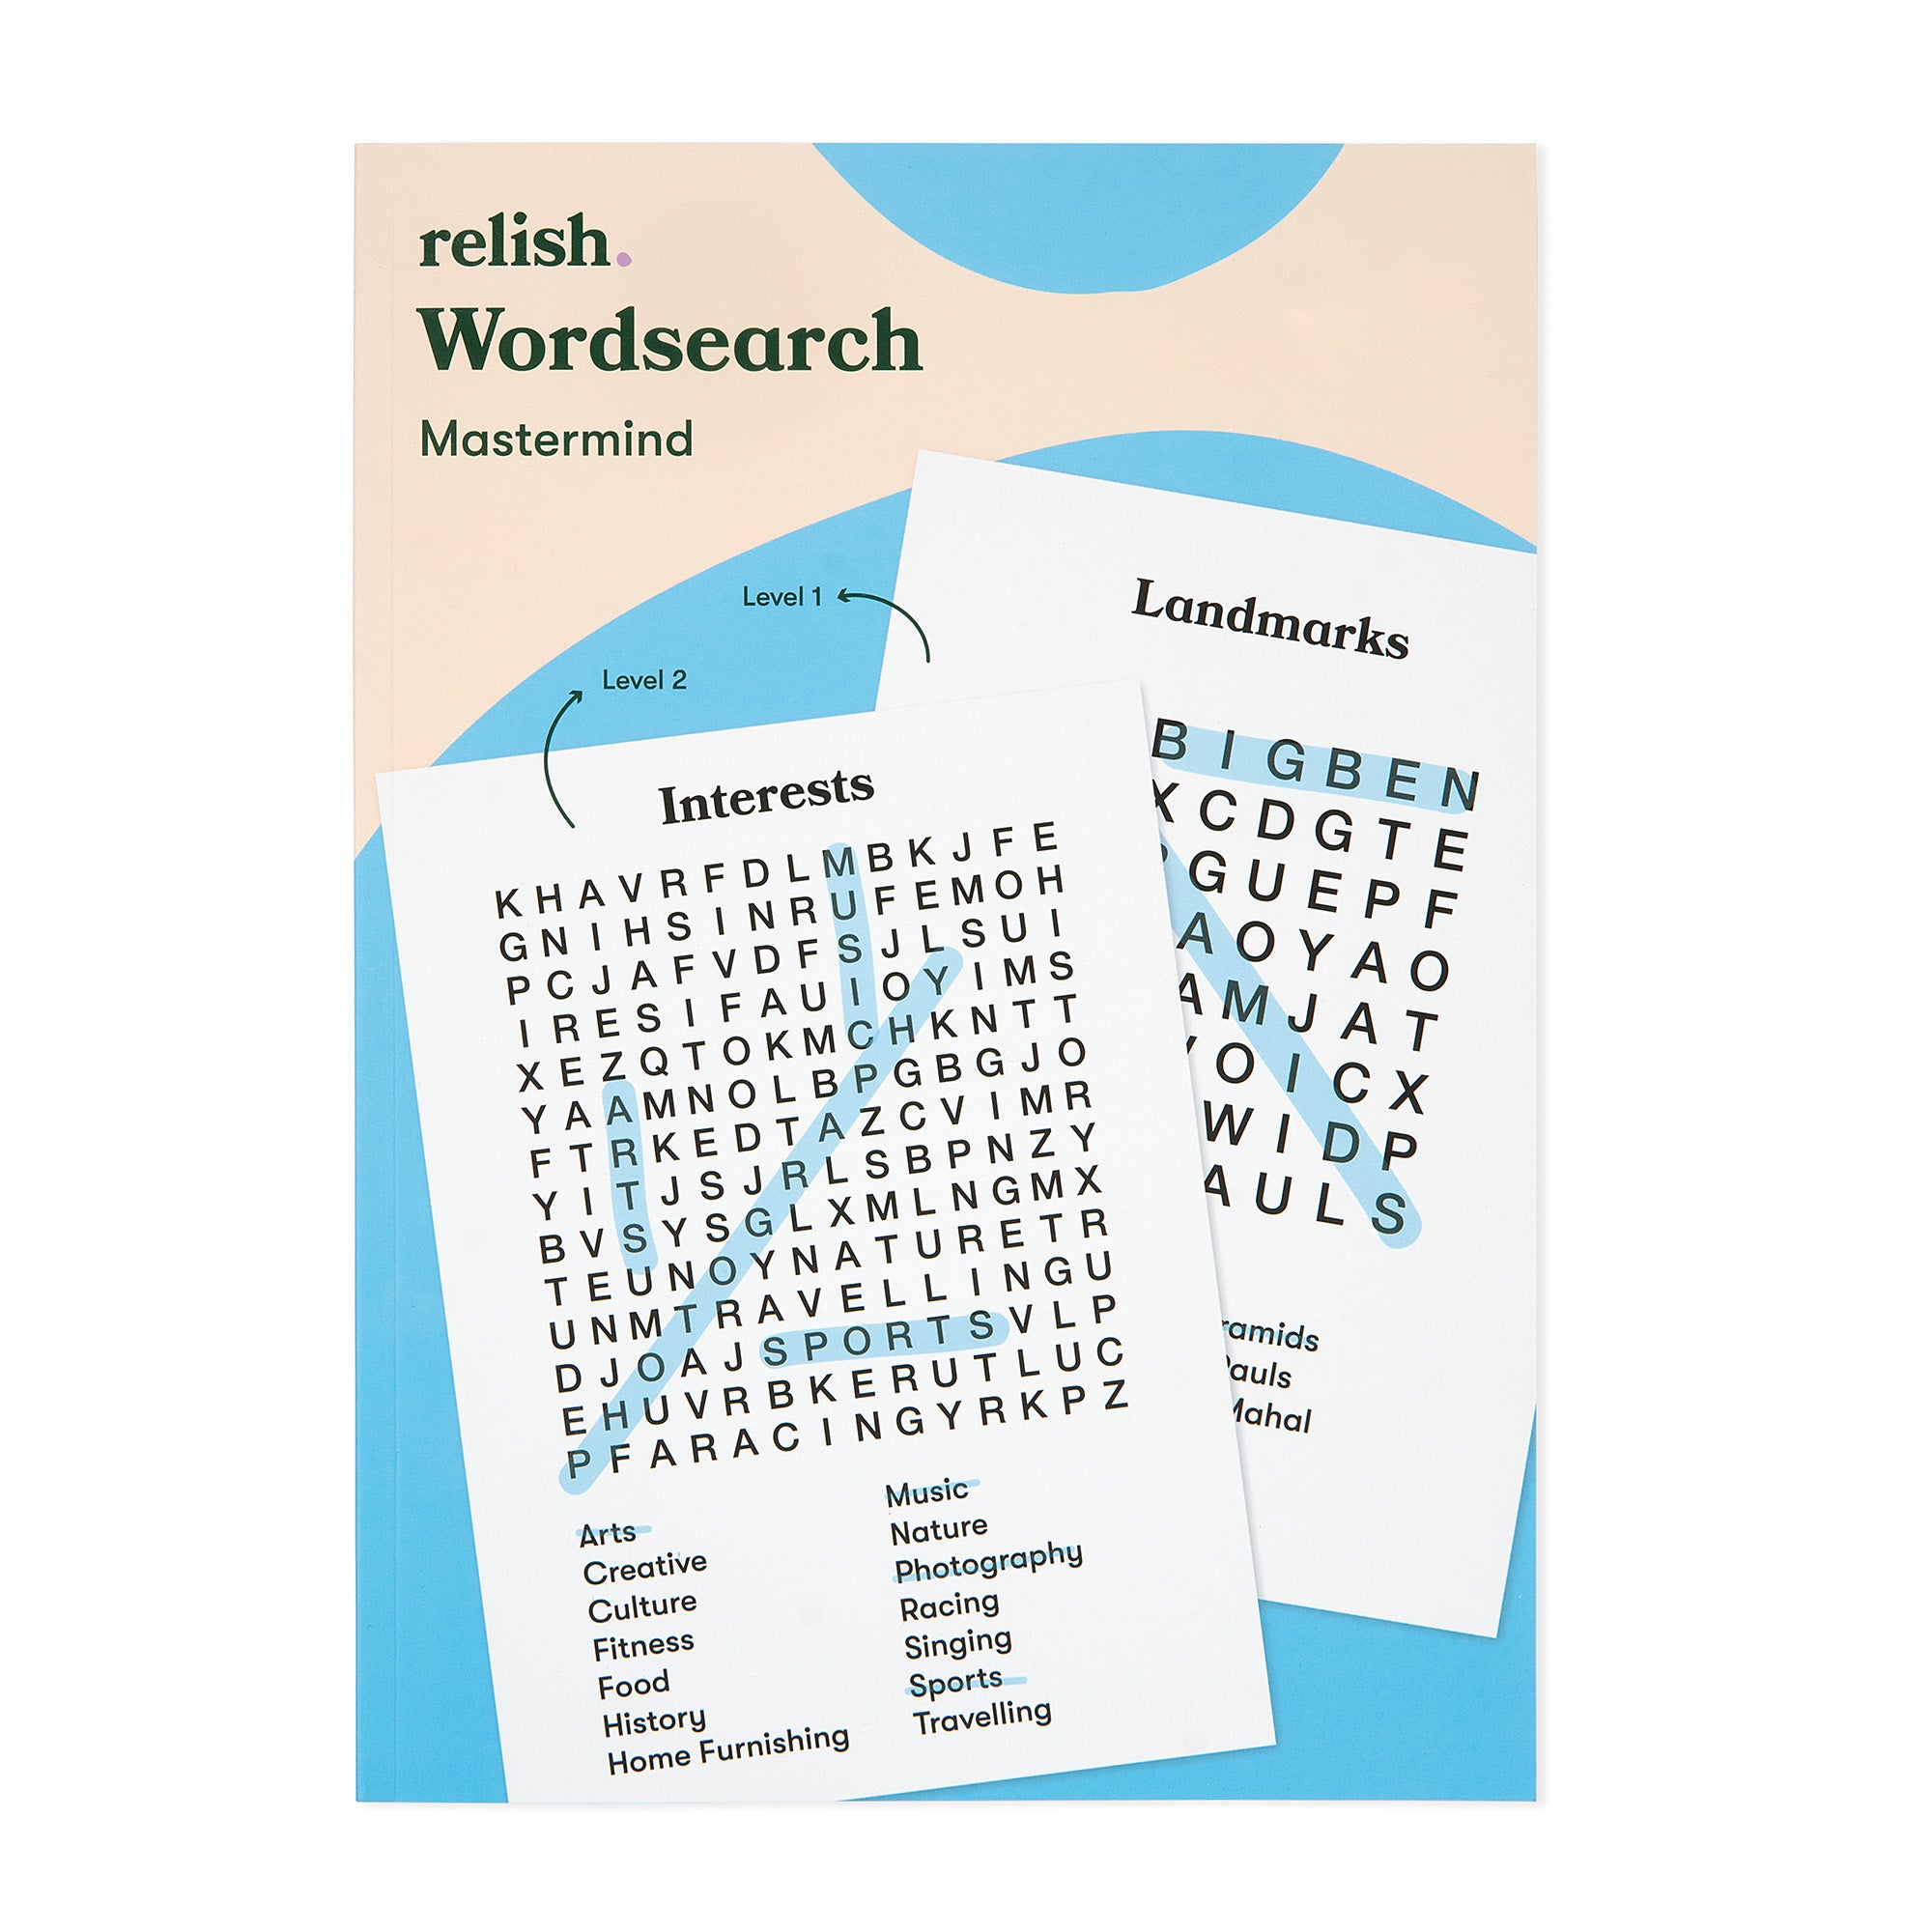 Wordsearch level 1 and 2